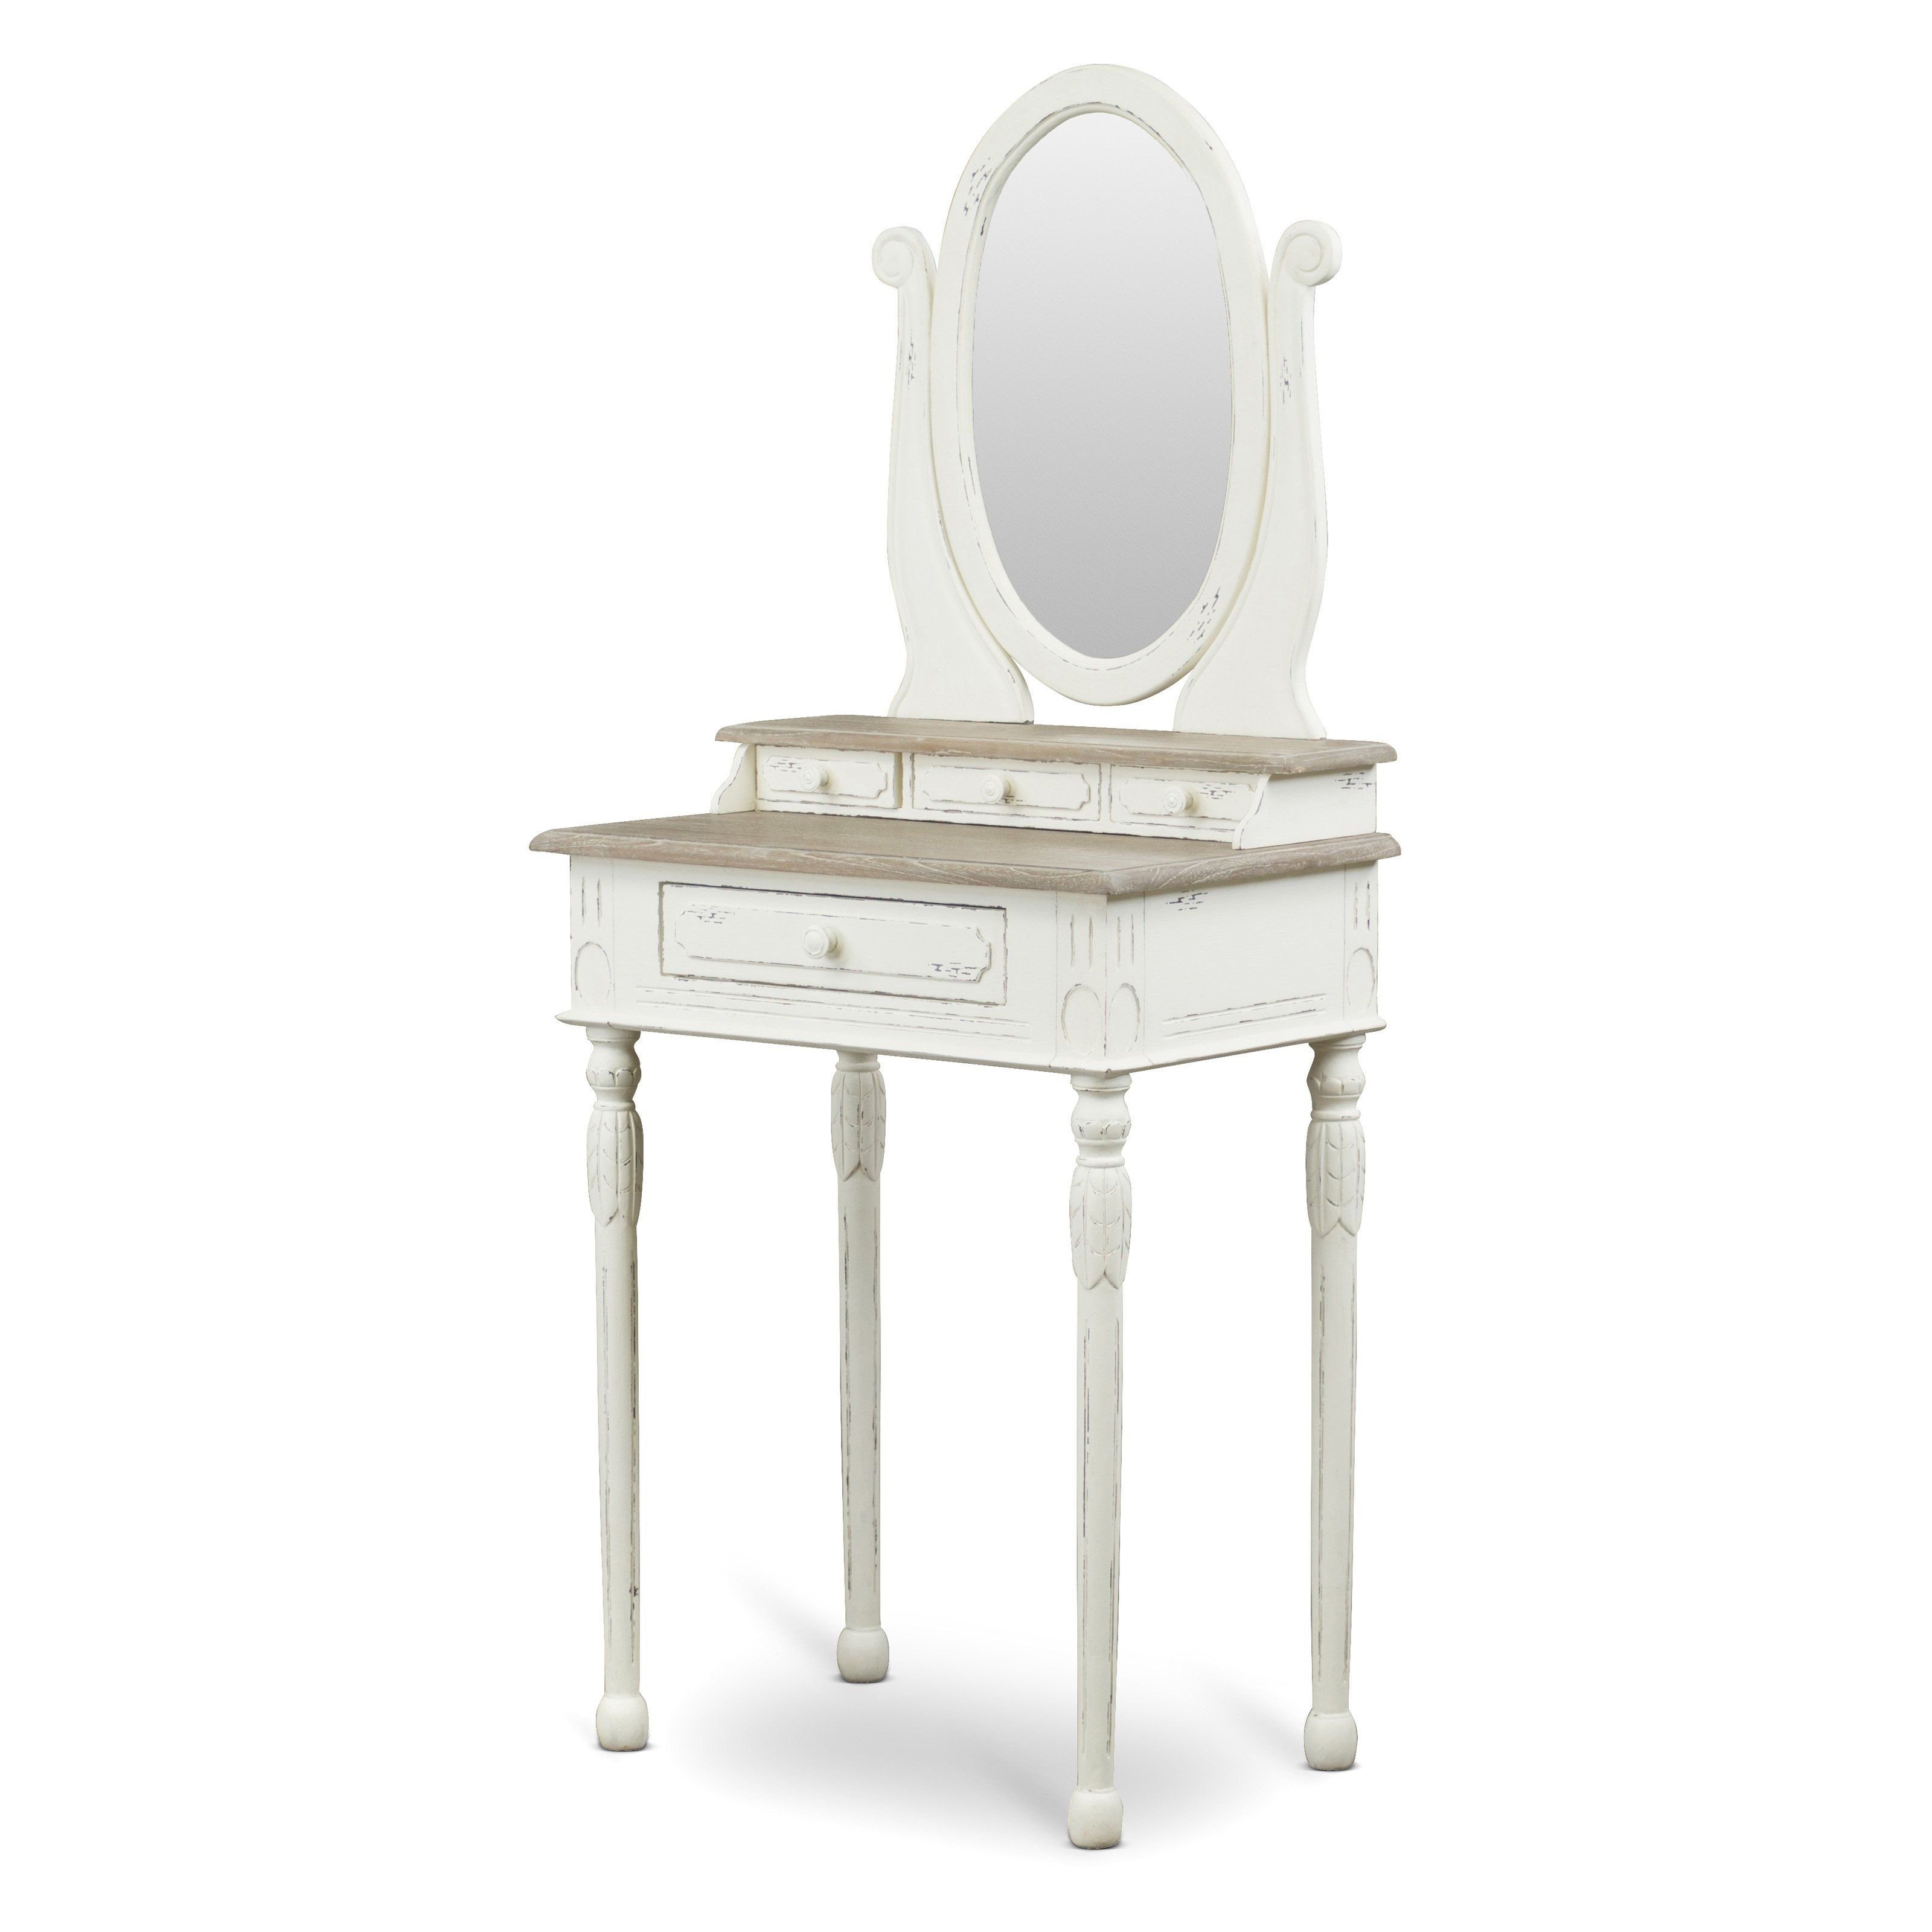 Bedroom Vanity with Drawers Unique Baxton Studio Anjou Dressing Table with Mirror Plm5vm M B